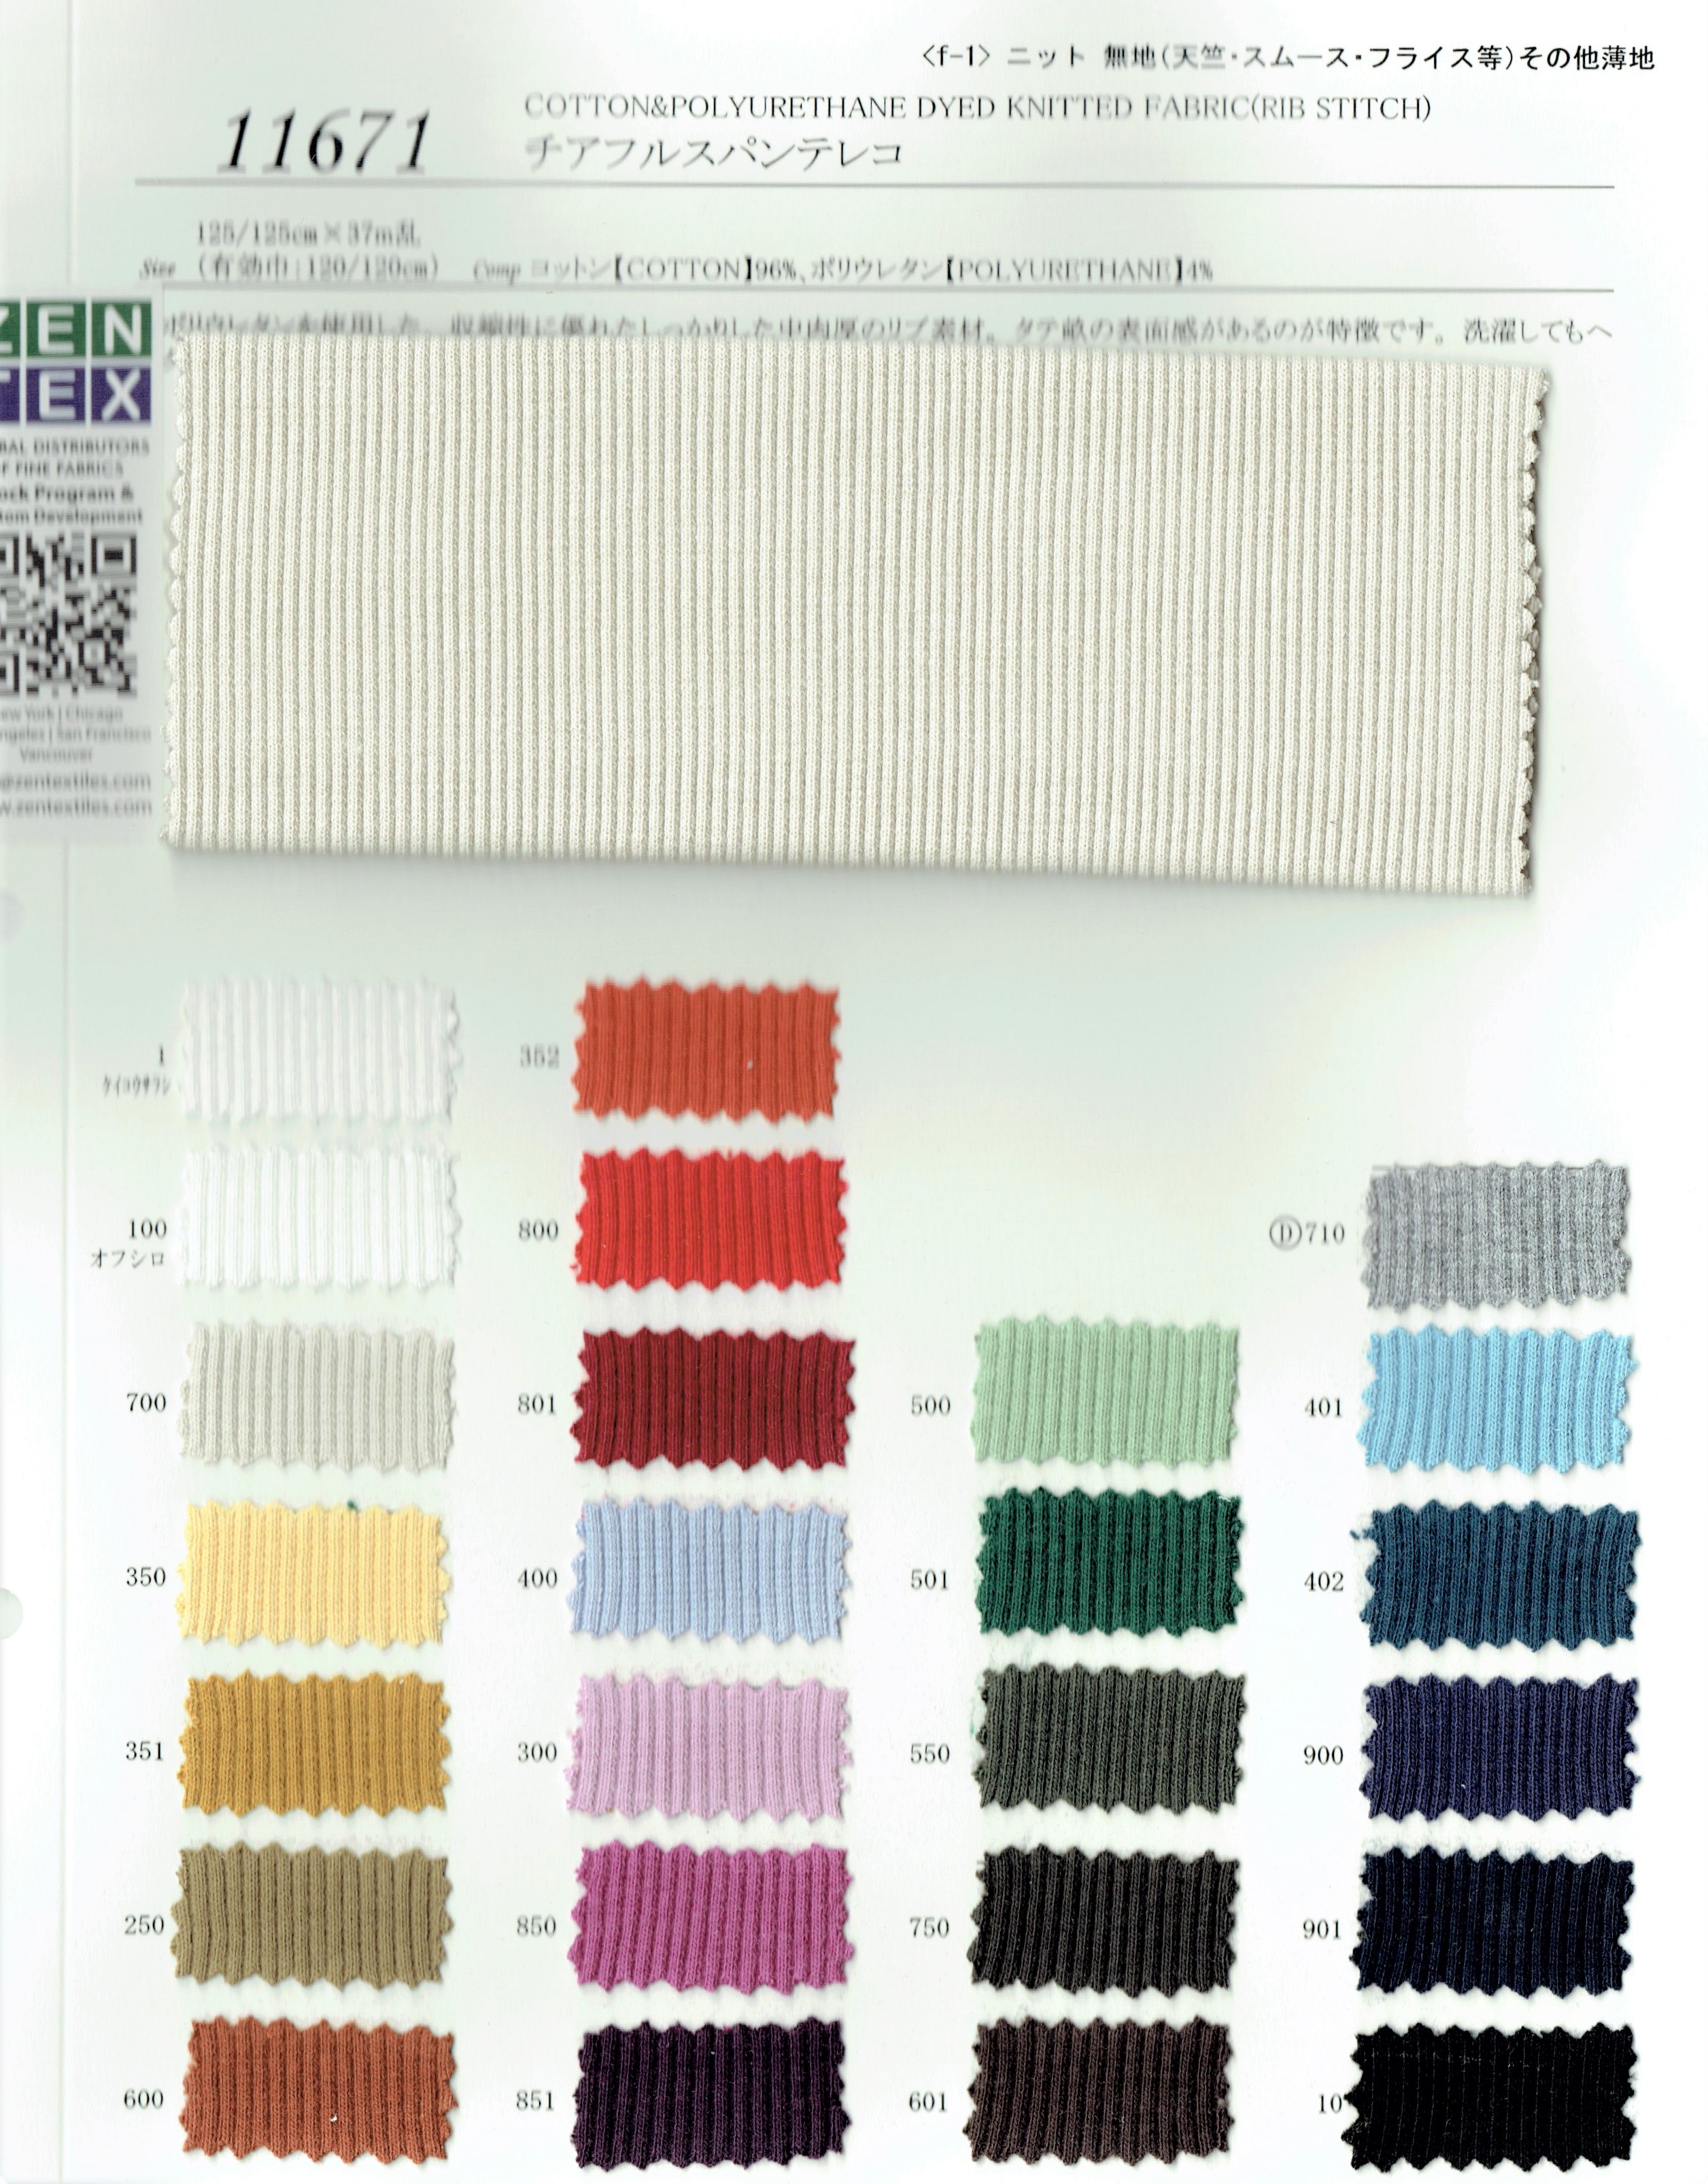 View COTTON96/POLYURETHANE4 DYED KNITTED FABRIC[RIB STITCH] DYED KNITTED FABRIC[RIB STITCH]